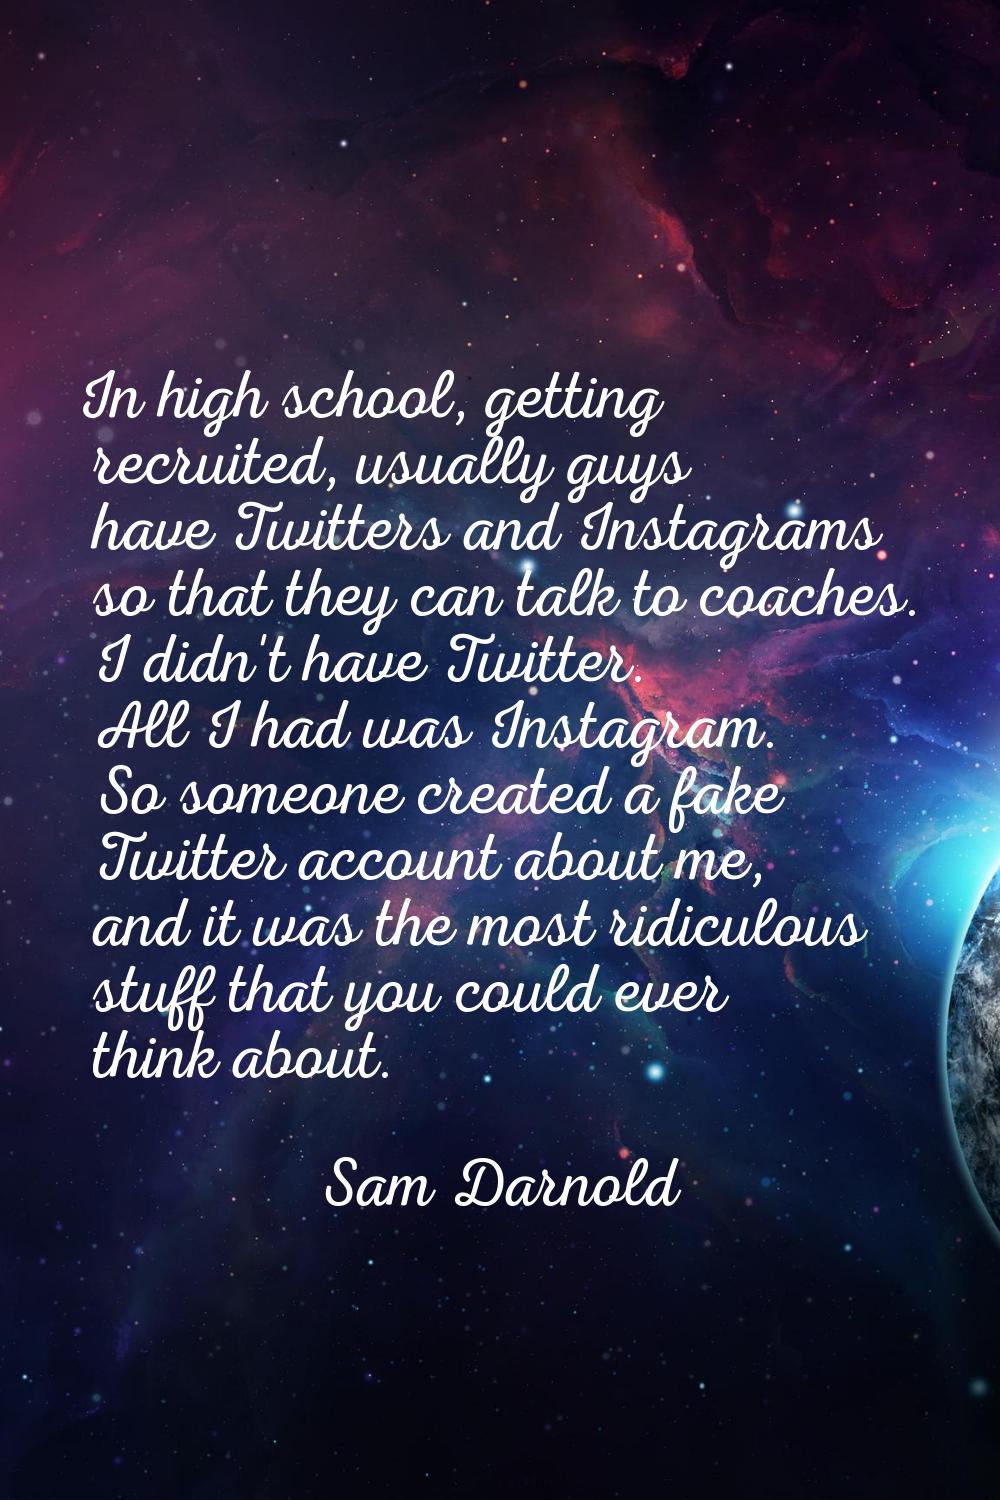 In high school, getting recruited, usually guys have Twitters and Instagrams so that they can talk 